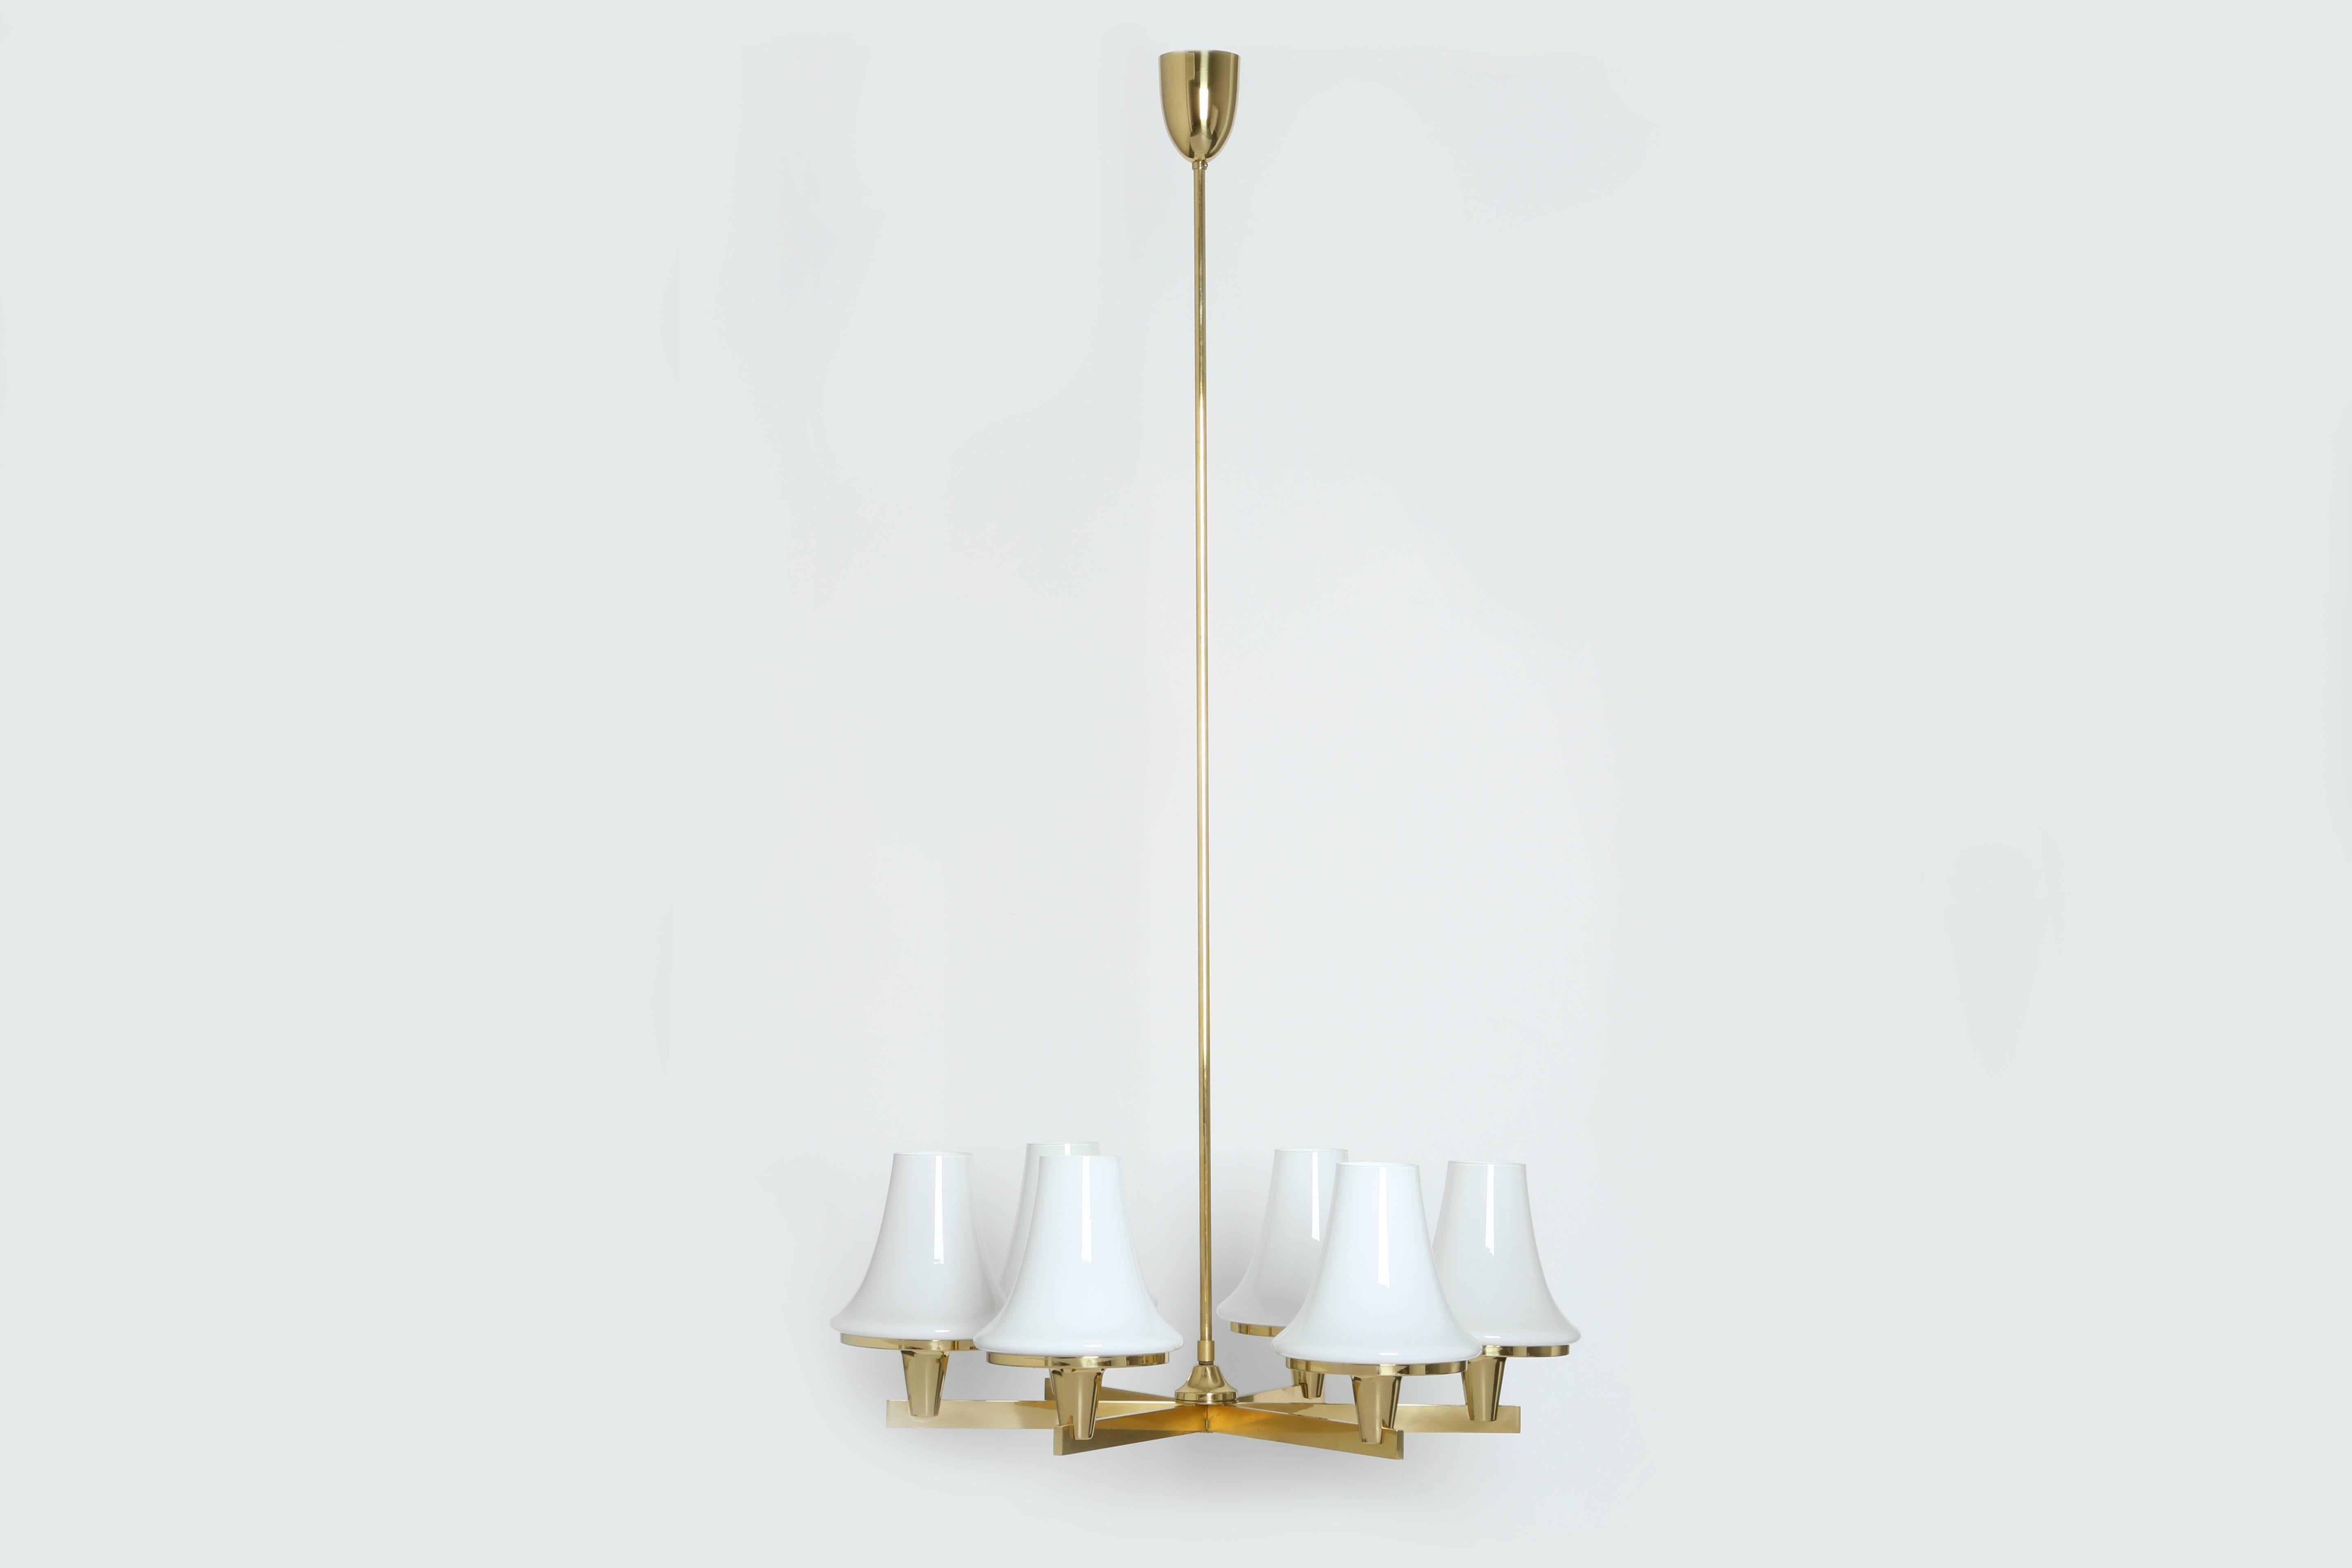 Hans-Agne Jakobsson chandelier.
Six branches holding large glass bells.
Sweden 1960s.
Matching table lamp available.